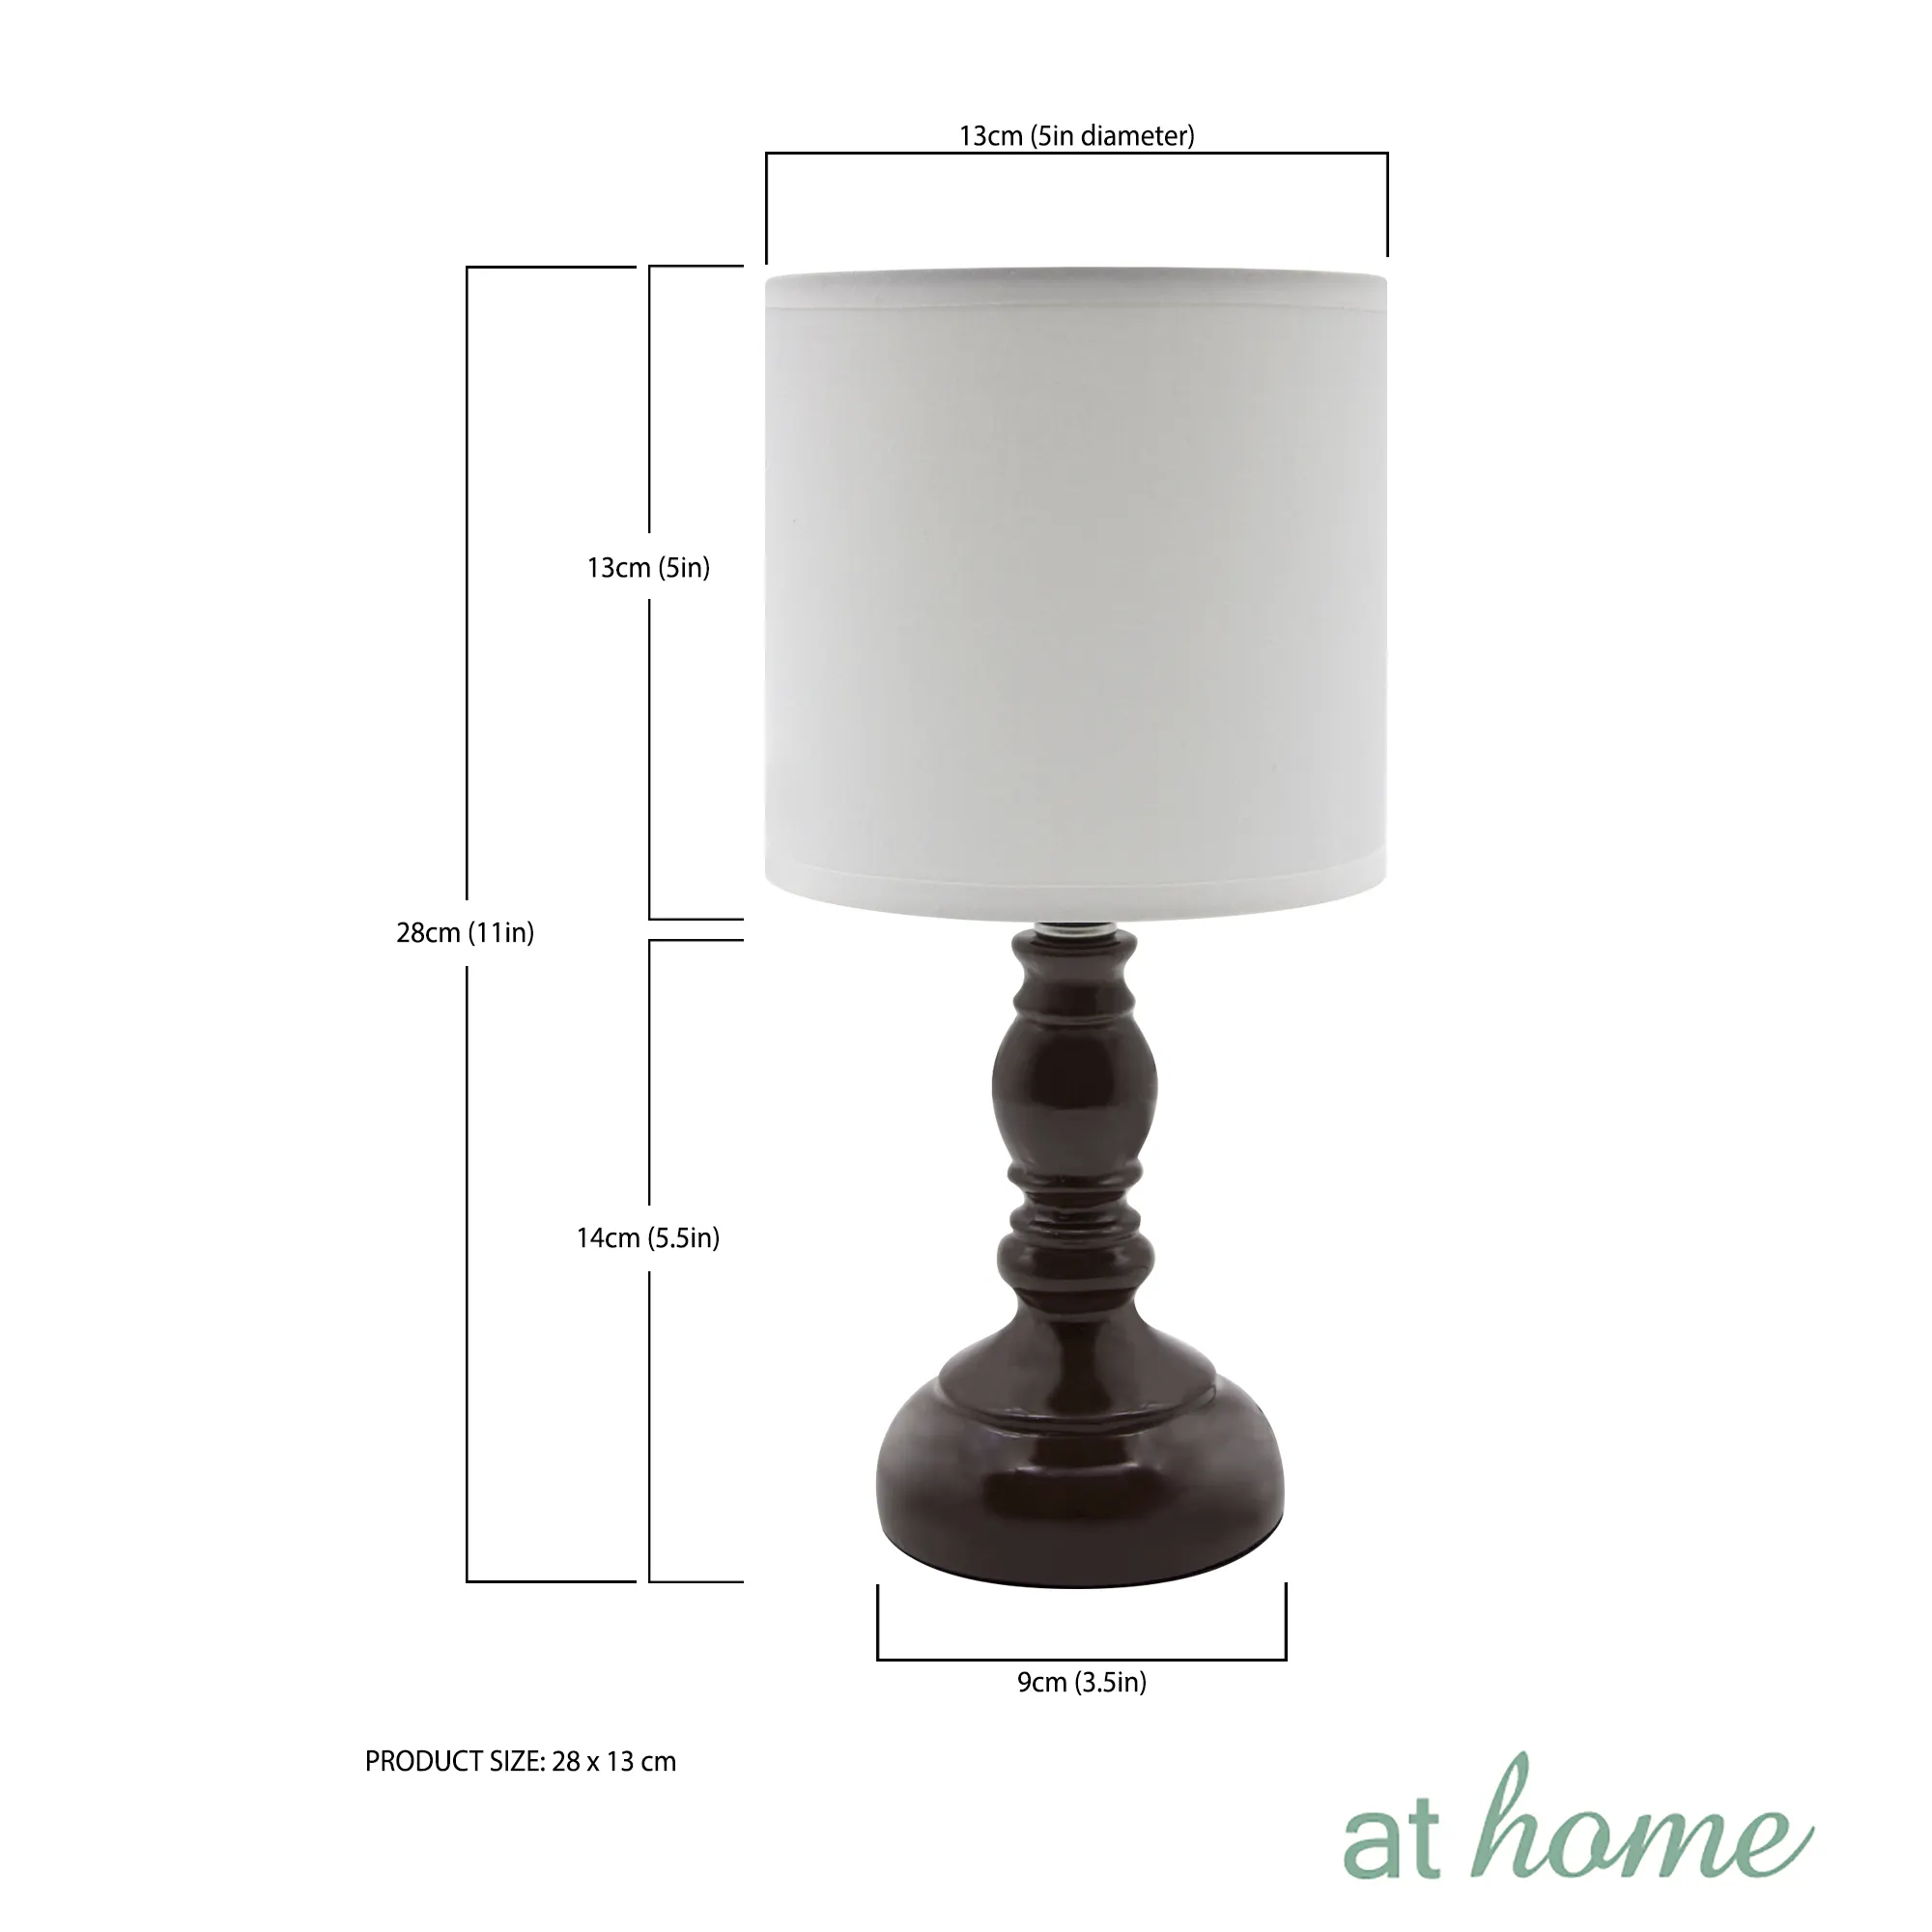 At Home Contemporary Ceramic Table Lamp 